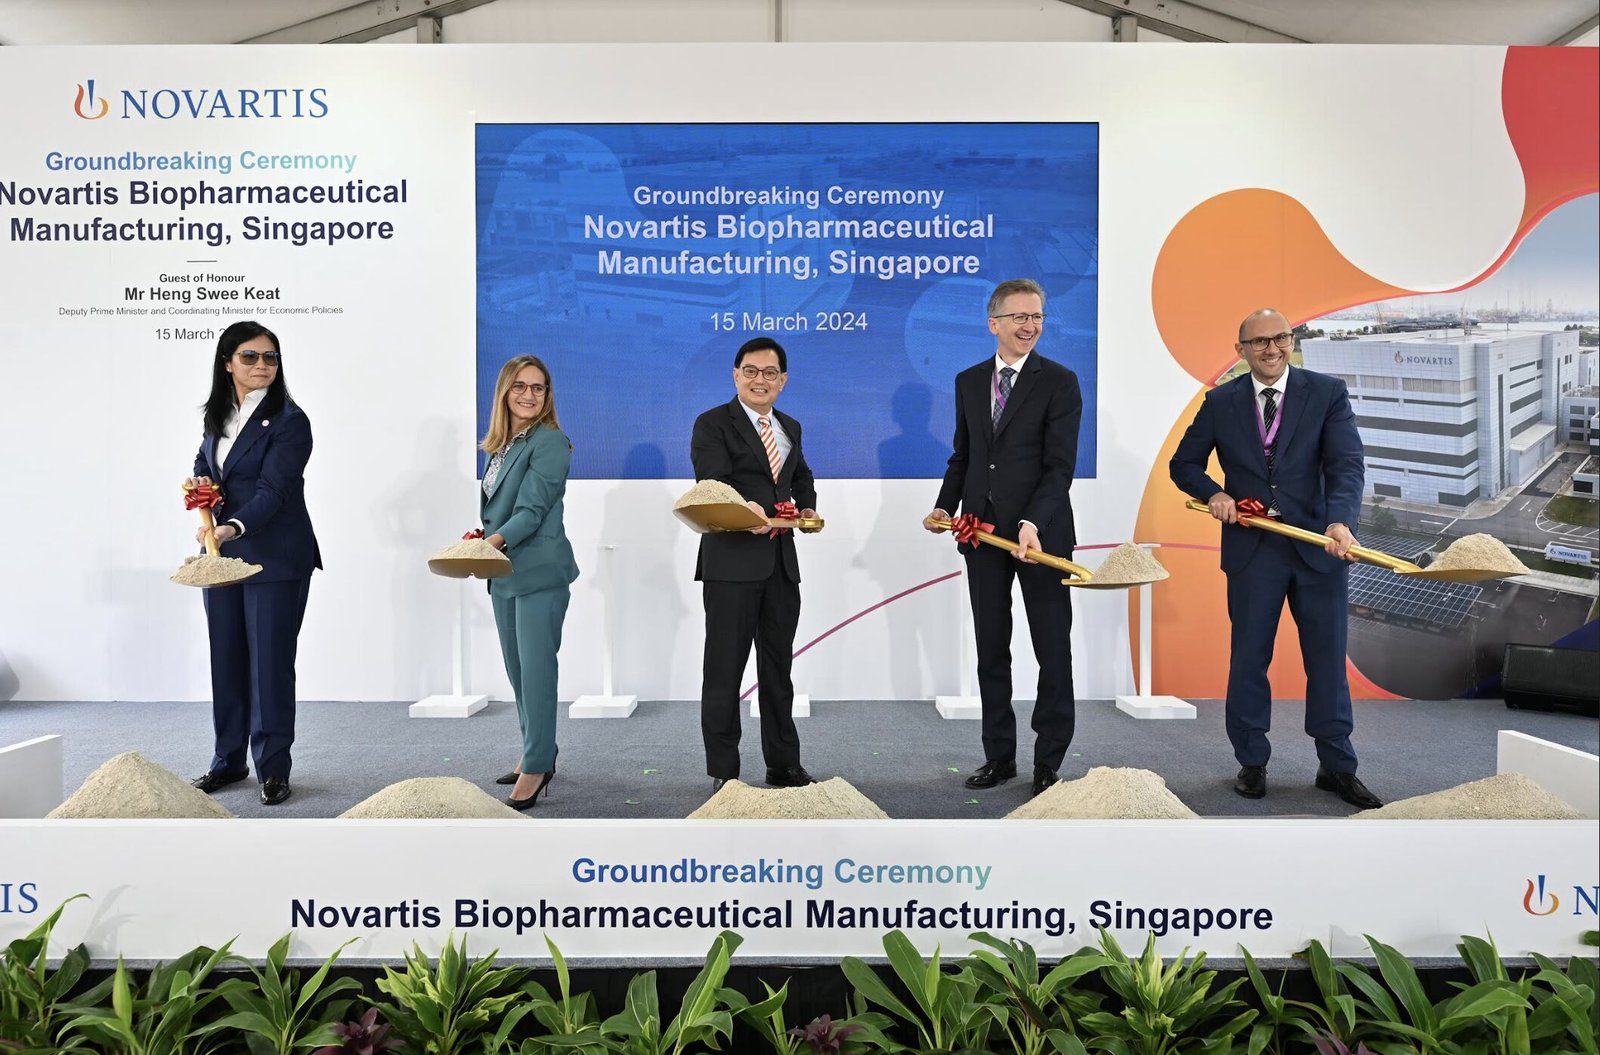  Ms Cindy Koh, Executive Vice President, EDB; Ms Ana Locatelli, Site Head at Novartis Singapore; ⁠Mr Heng Swee Keat, Deputy Prime Minister and Coordinating Minister for Economic Policies; Mr Steffen Lang, President of Operations at Novartis; Mr Christoph Buerki, Chief Financial Officer of Operations at Novartis (Left to right)